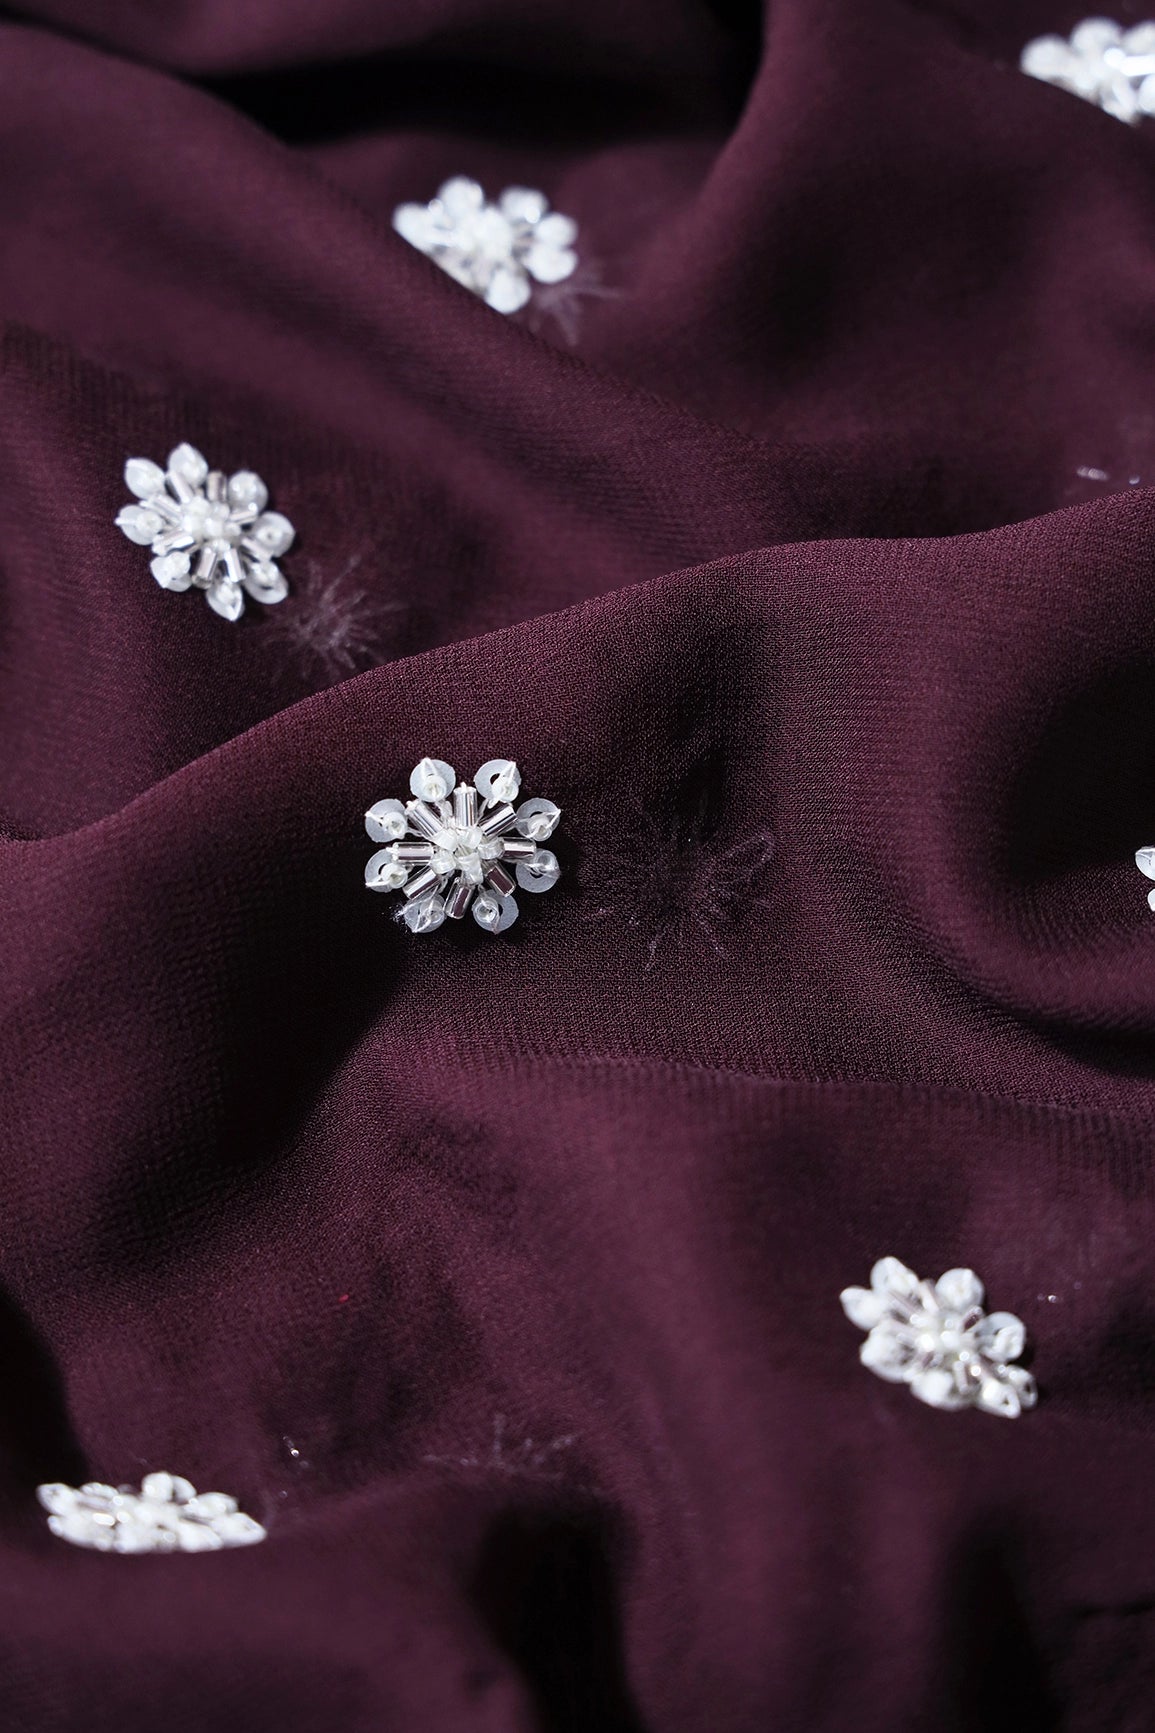 Silver Beads With Sequins Small Floral Handwork Embroidery On Wine Viscose Georgette Fabric